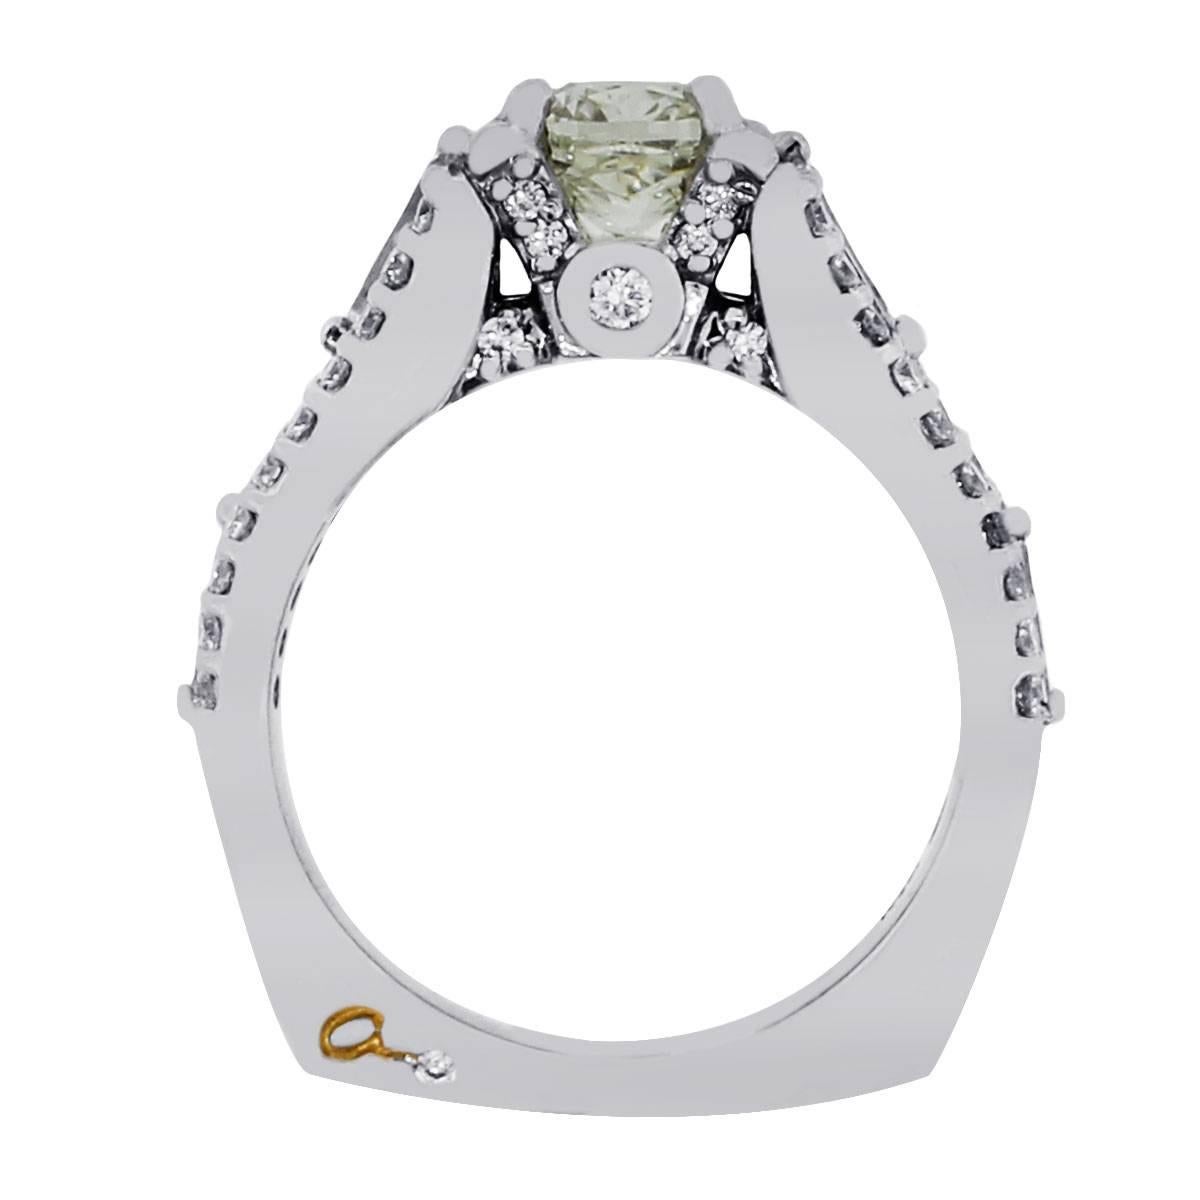 Brand: A. Jaffe
Material: Platinum
Center Diamond Details: Approximately 1ct cushion cut diamond. Diamond is I-J in color and SI in clarity.
Diamond Details: Approximately 1.50ctw of accent diamonds. Diamonds are G/H in color and VS in clarity.
Ring